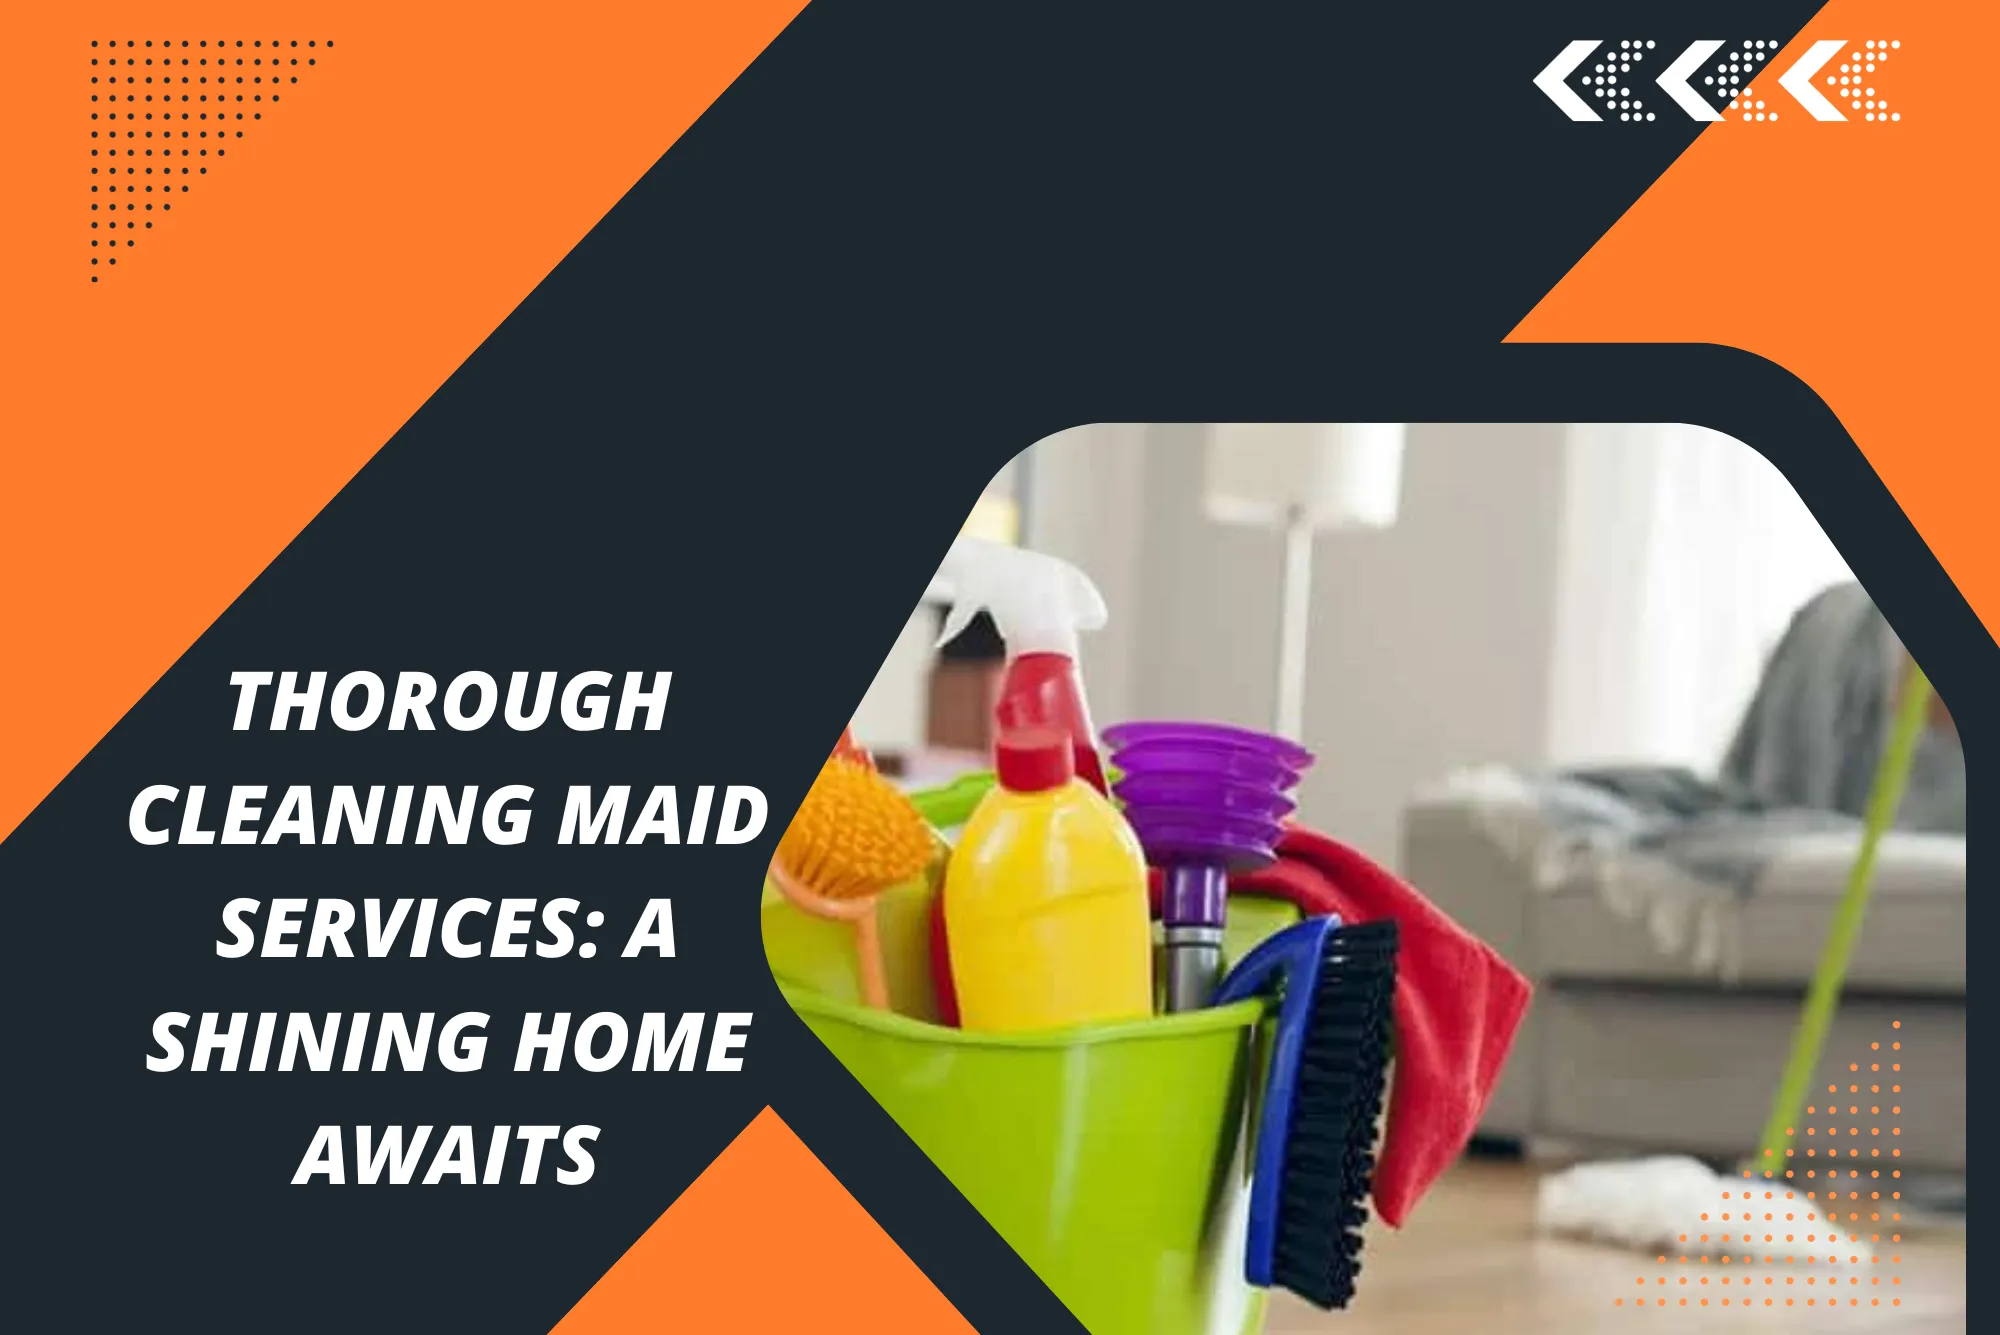 Thorough Cleaning Maid Services A Shining Home Awaits